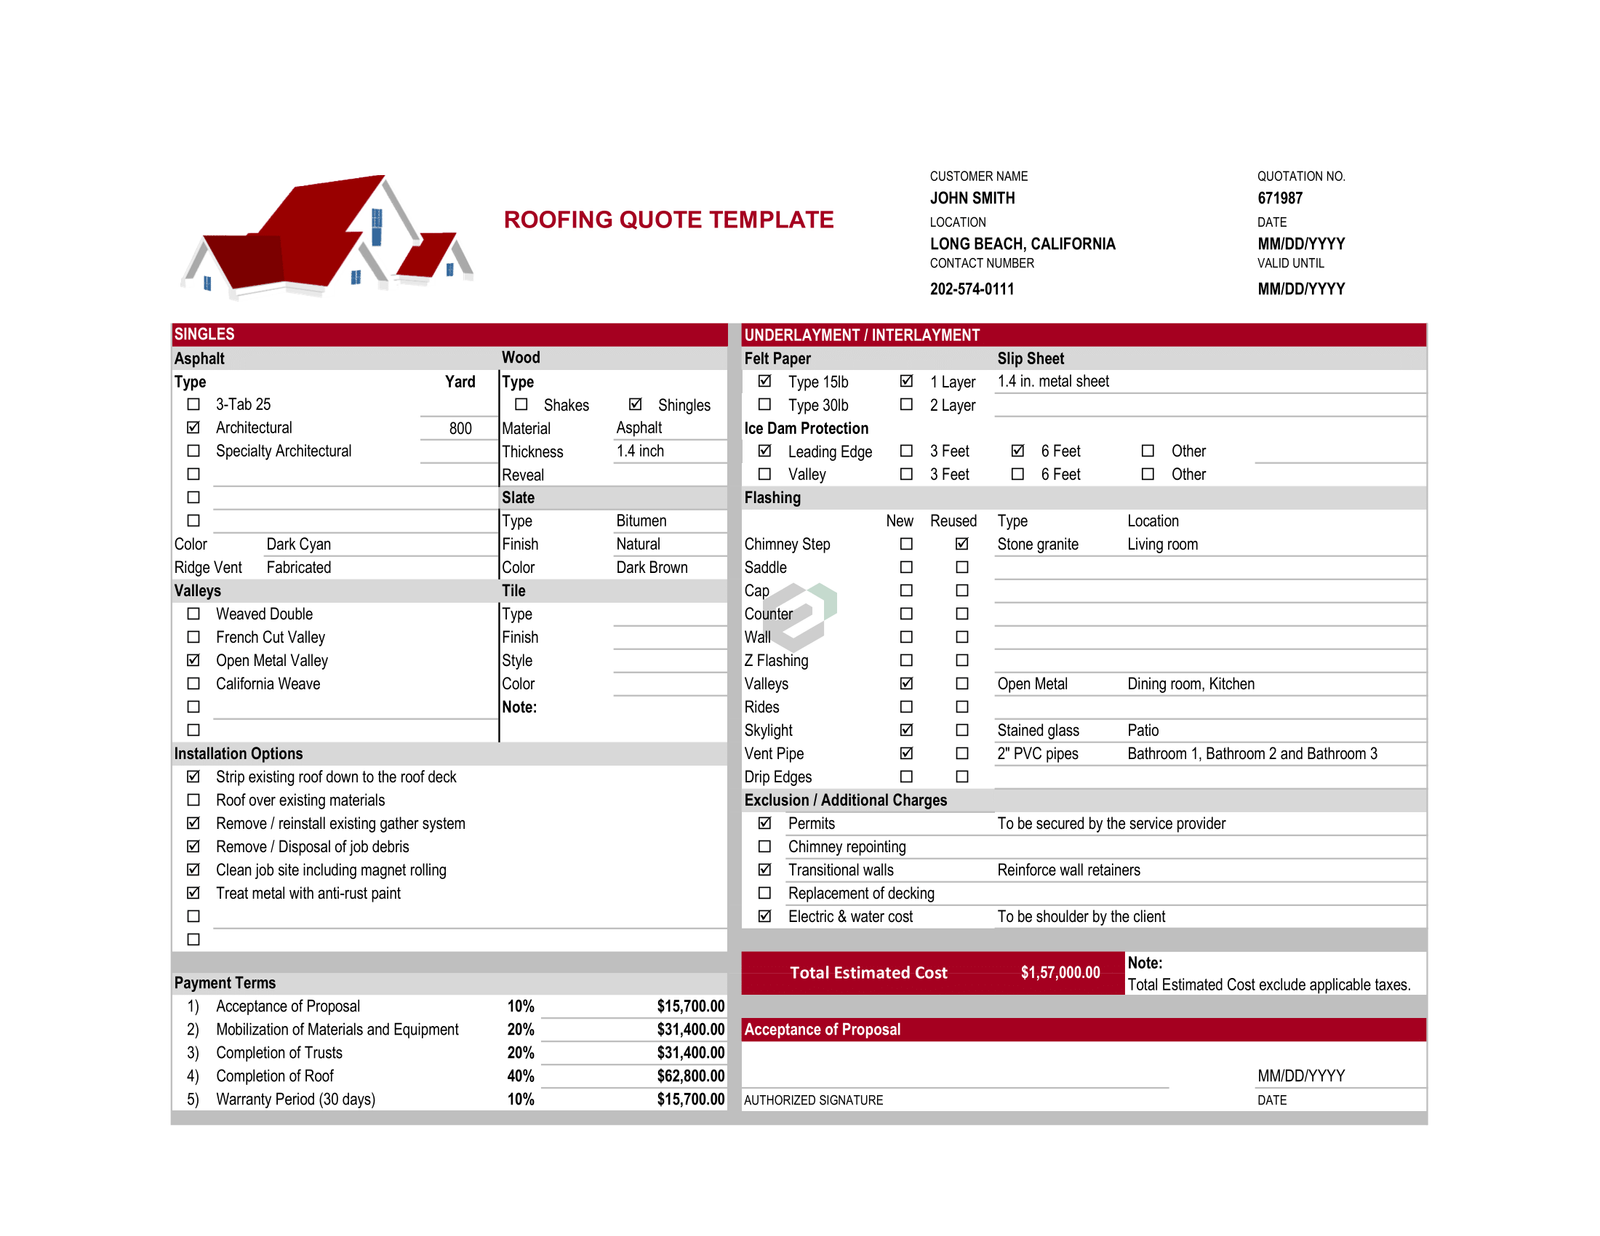 Roofing Services Quotation Template-1